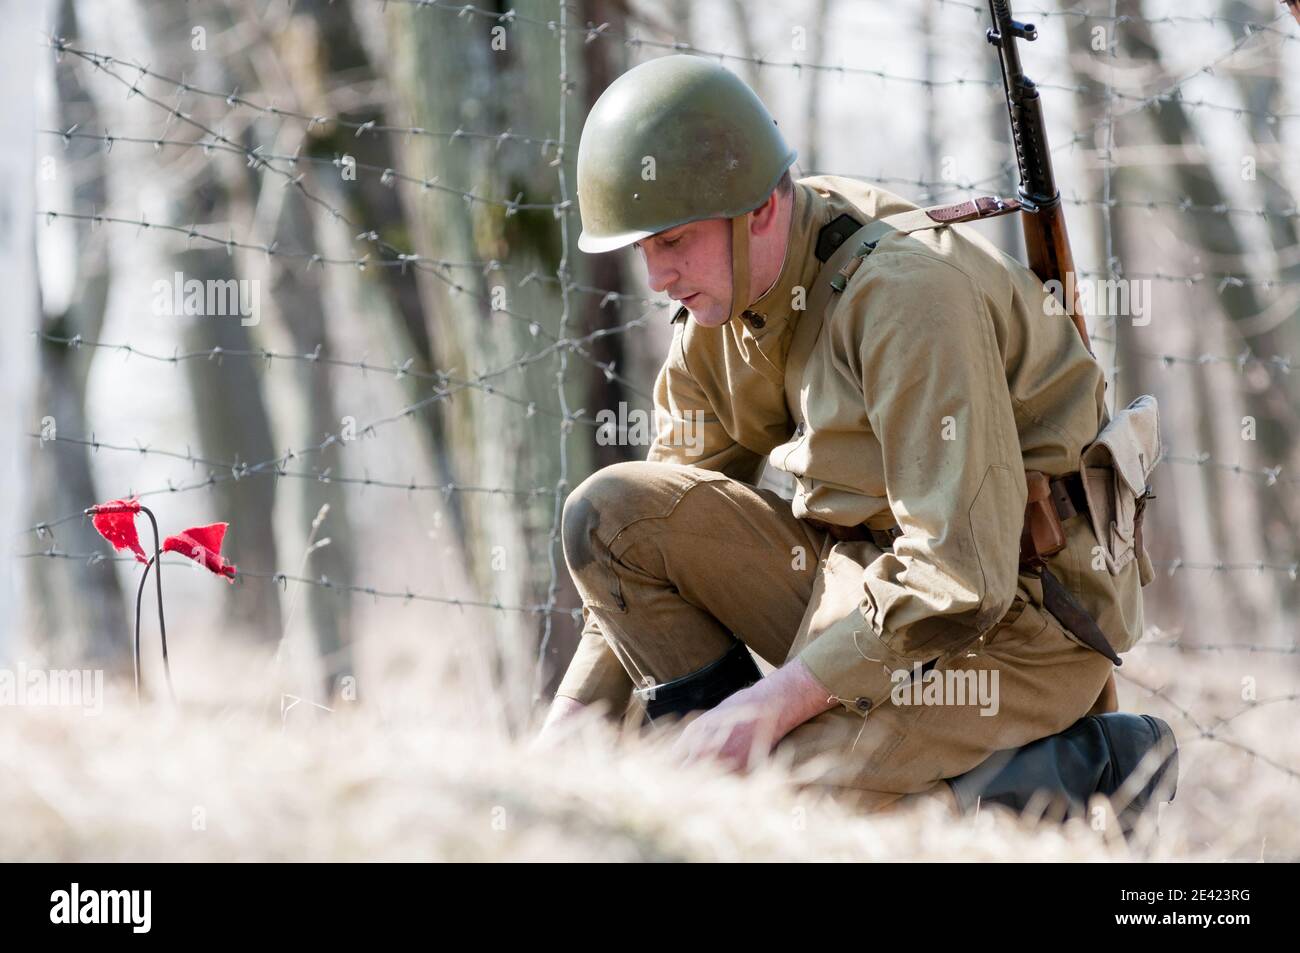 KALININGRAD, RUSSIA - April 08, 2018: Unidentified man in the uniform of a Soviet soldier sets up a land mine Stock Photo